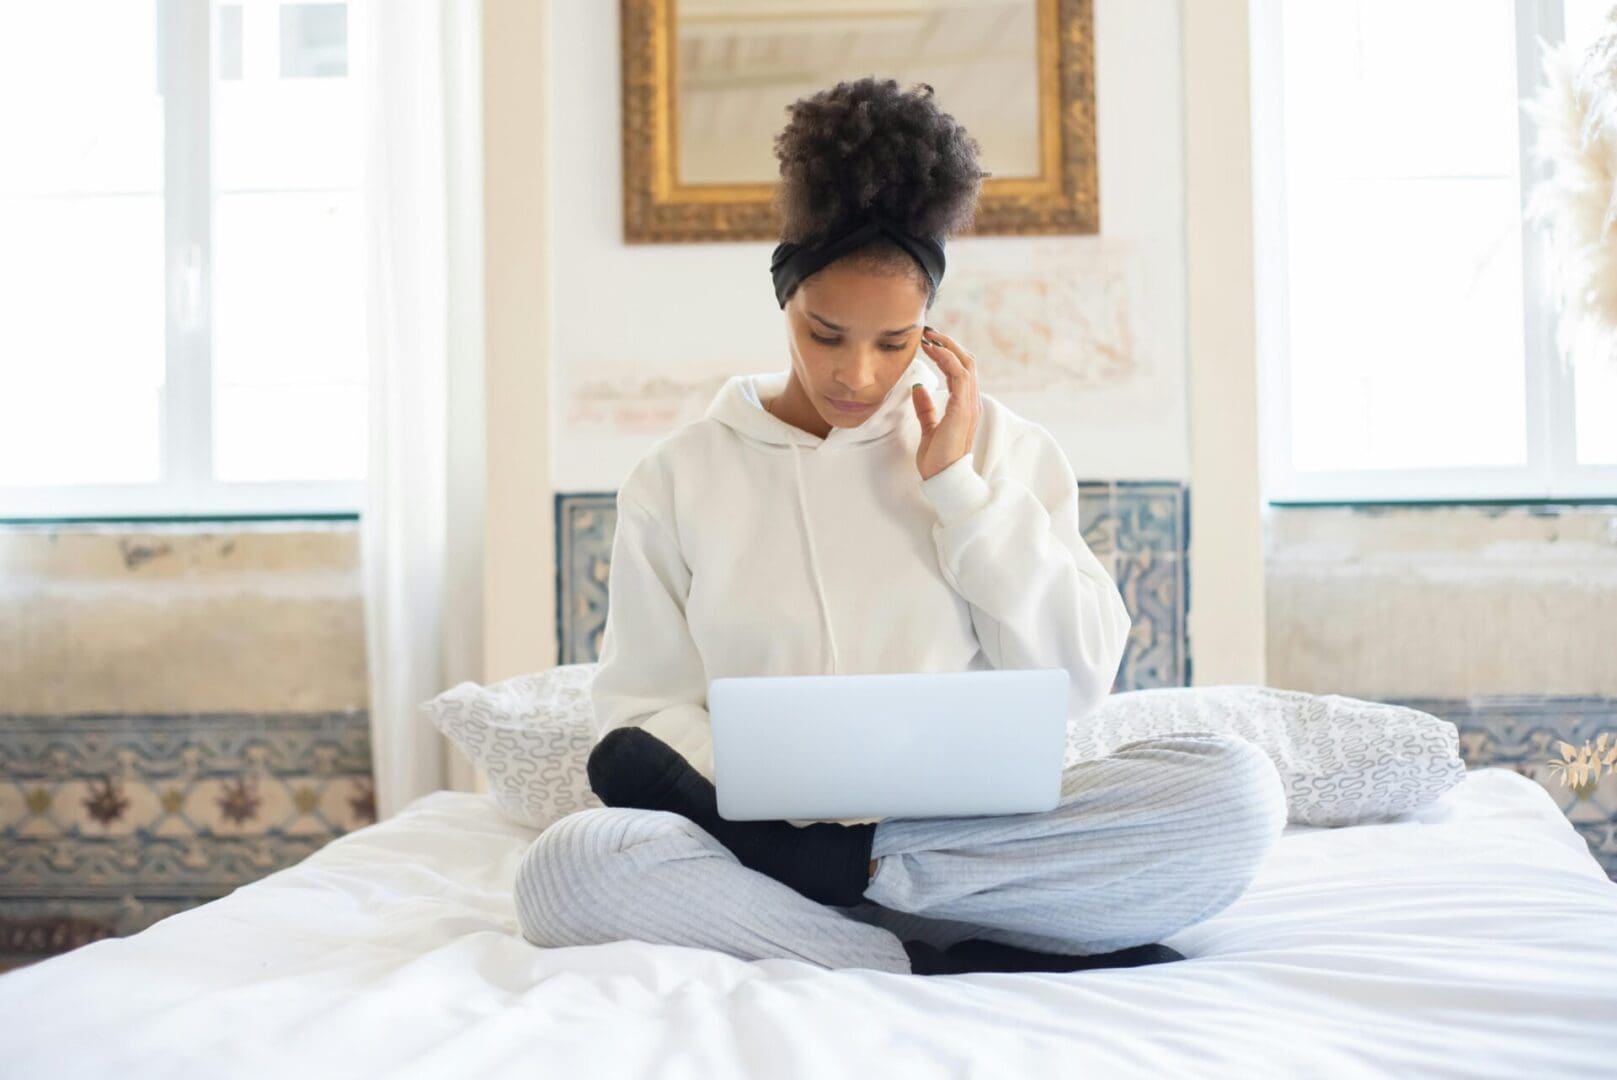 A woman sitting on the bed looking at her laptop.